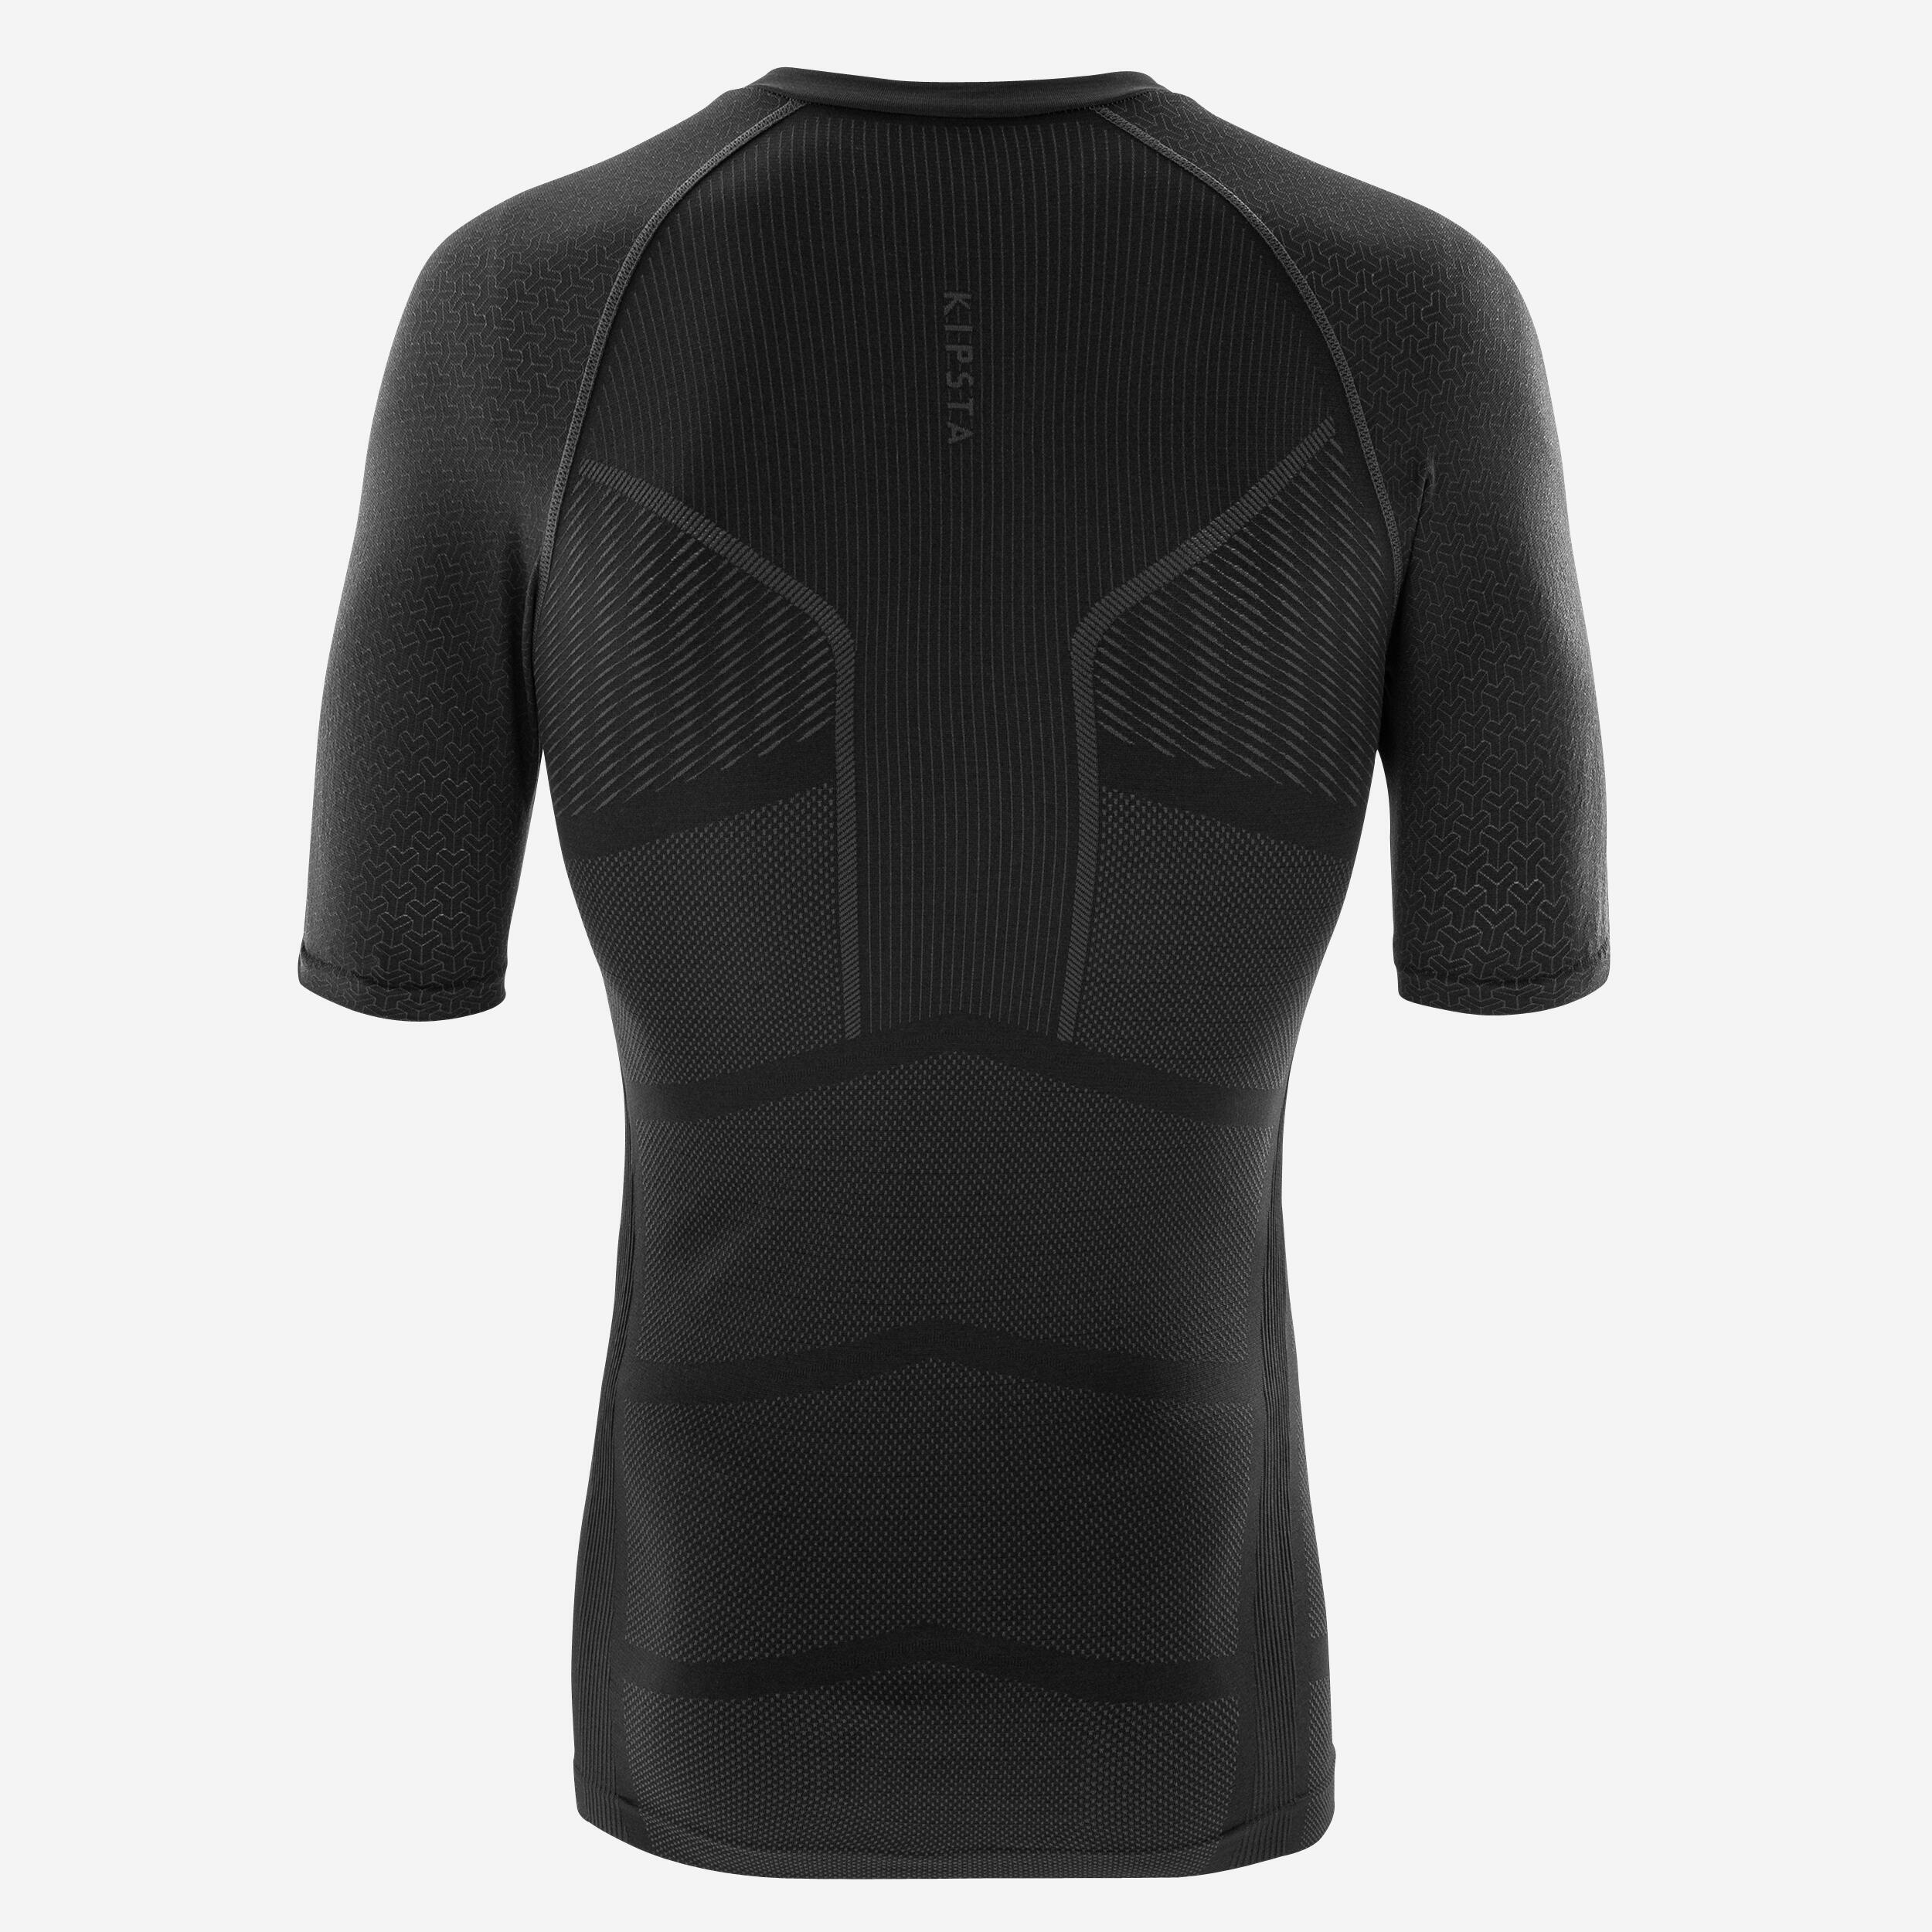 Adult Short-Sleeved Thermal Base Layer Top Keepdry 500 - Black 3/5